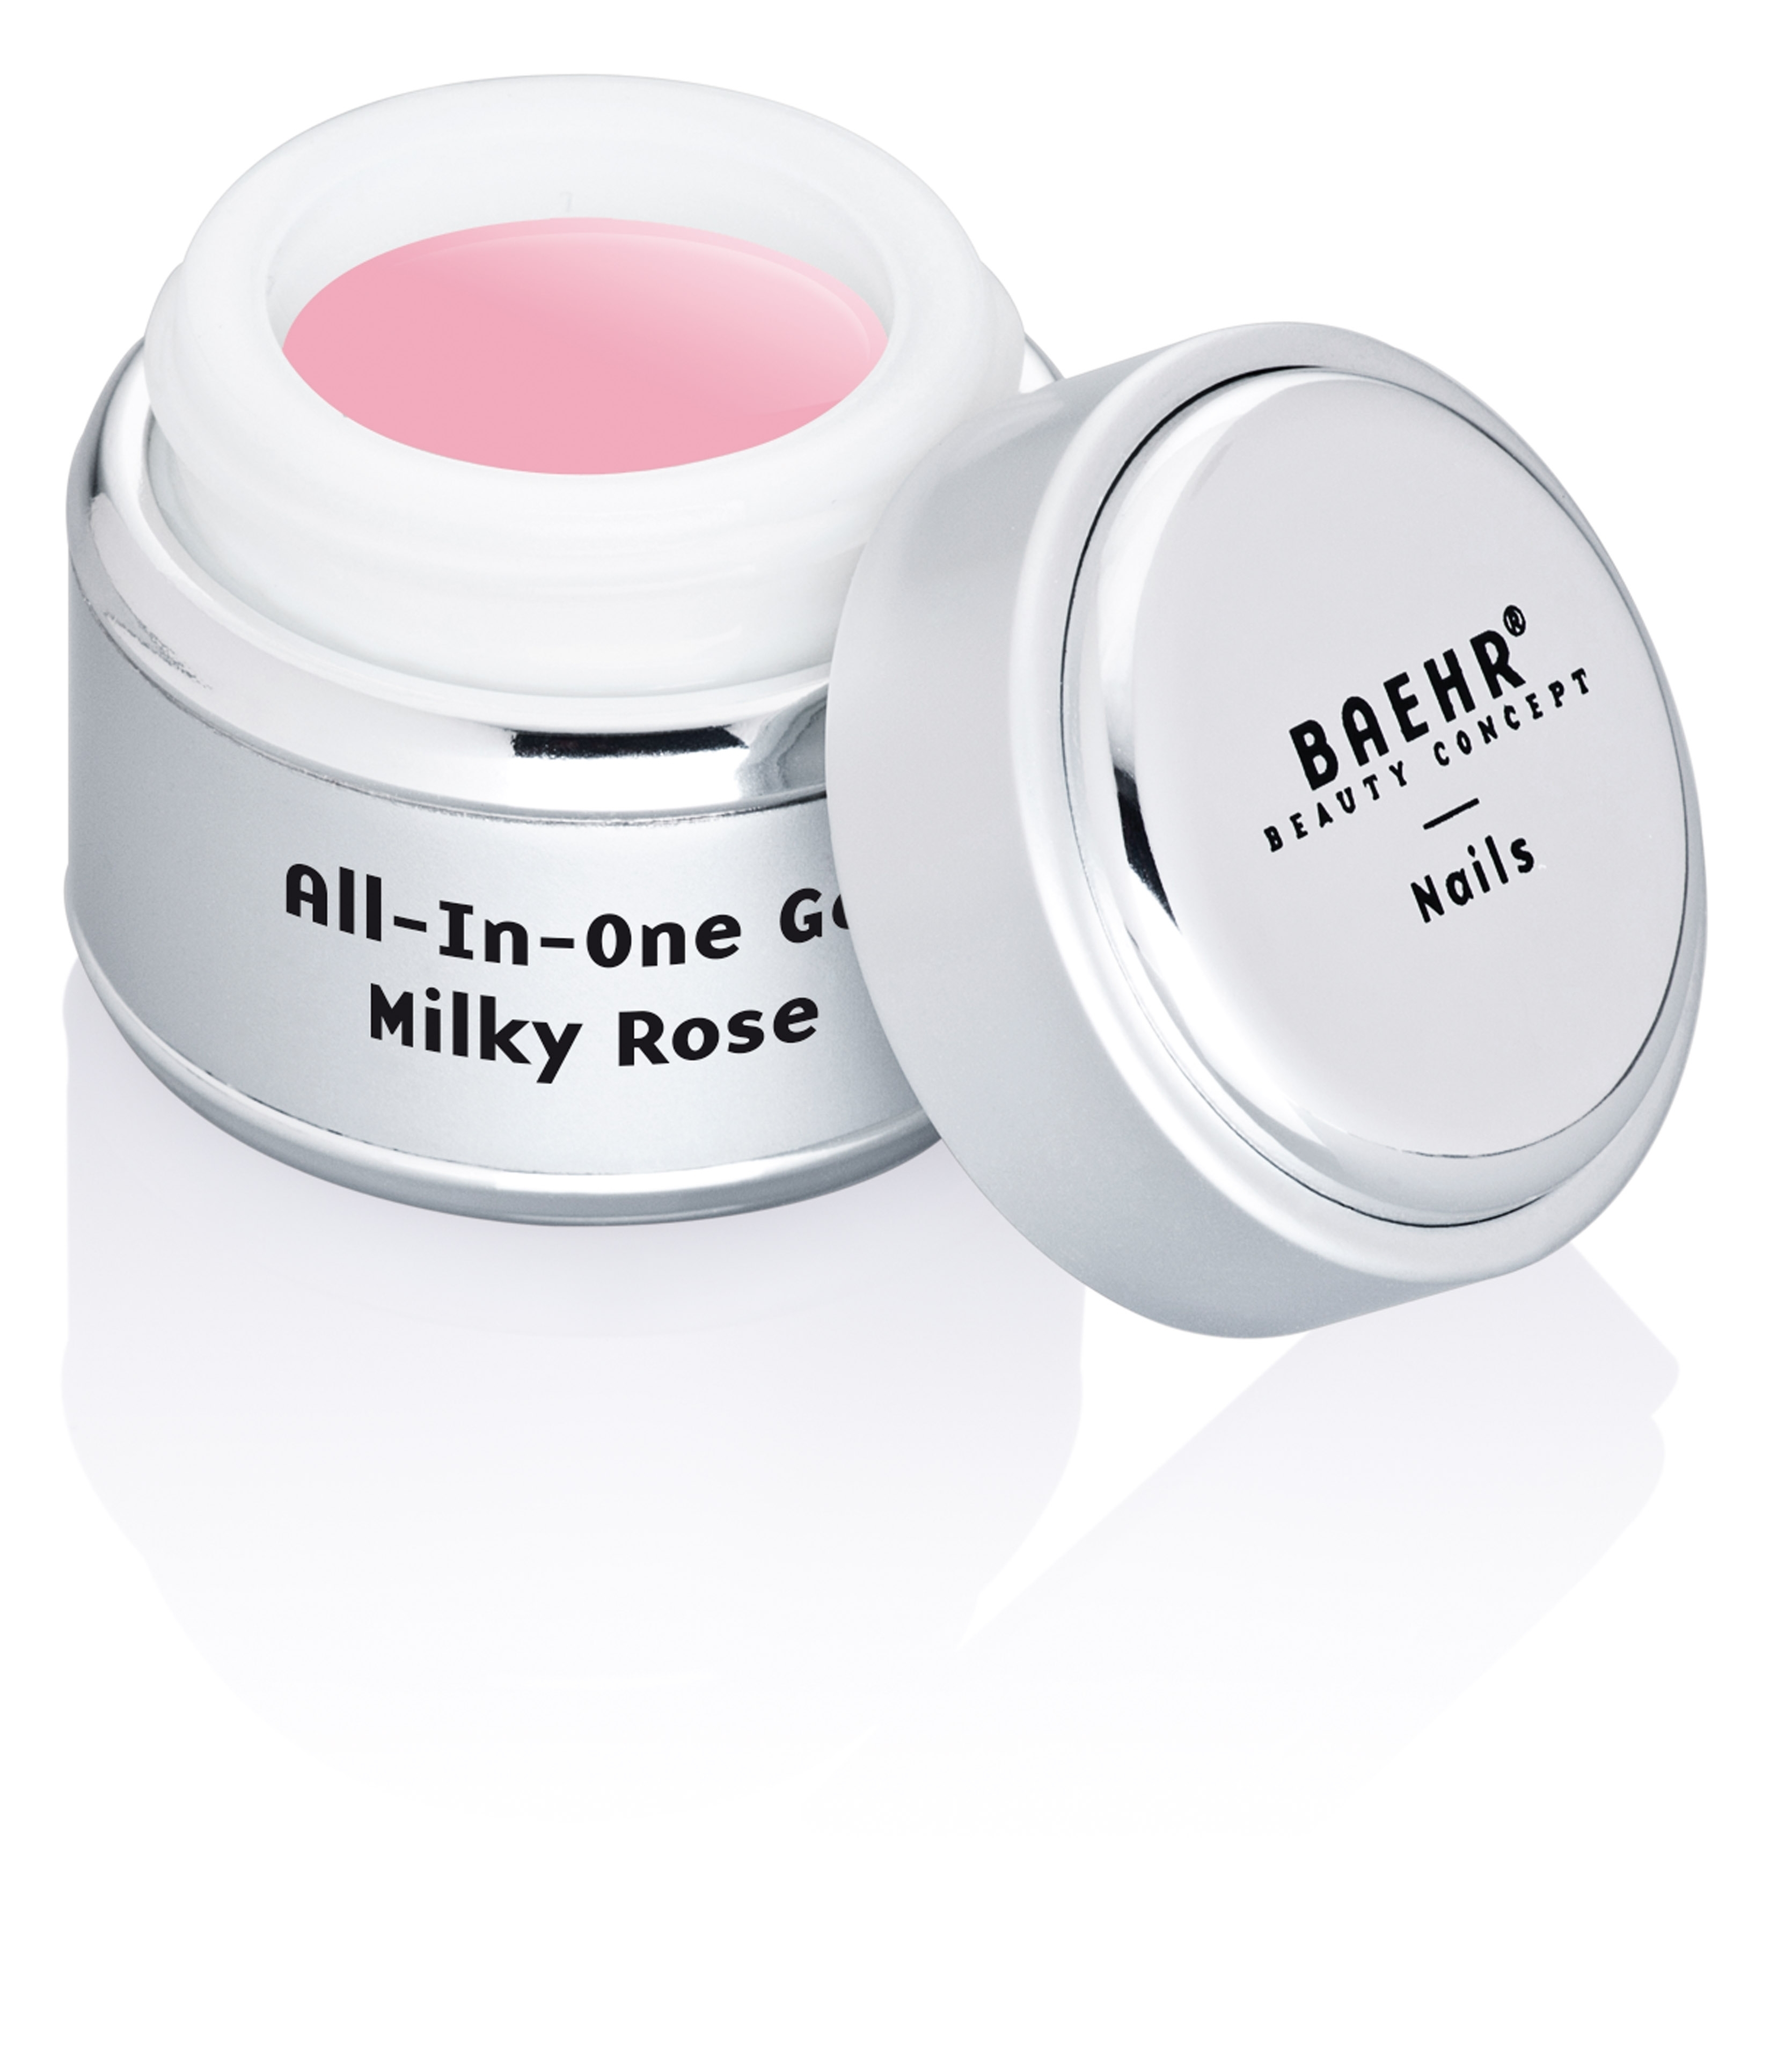 BAEHR BEAUTY CONCEPT - NAILS All-In-One Gel milky rose, UV & LED 30 ml